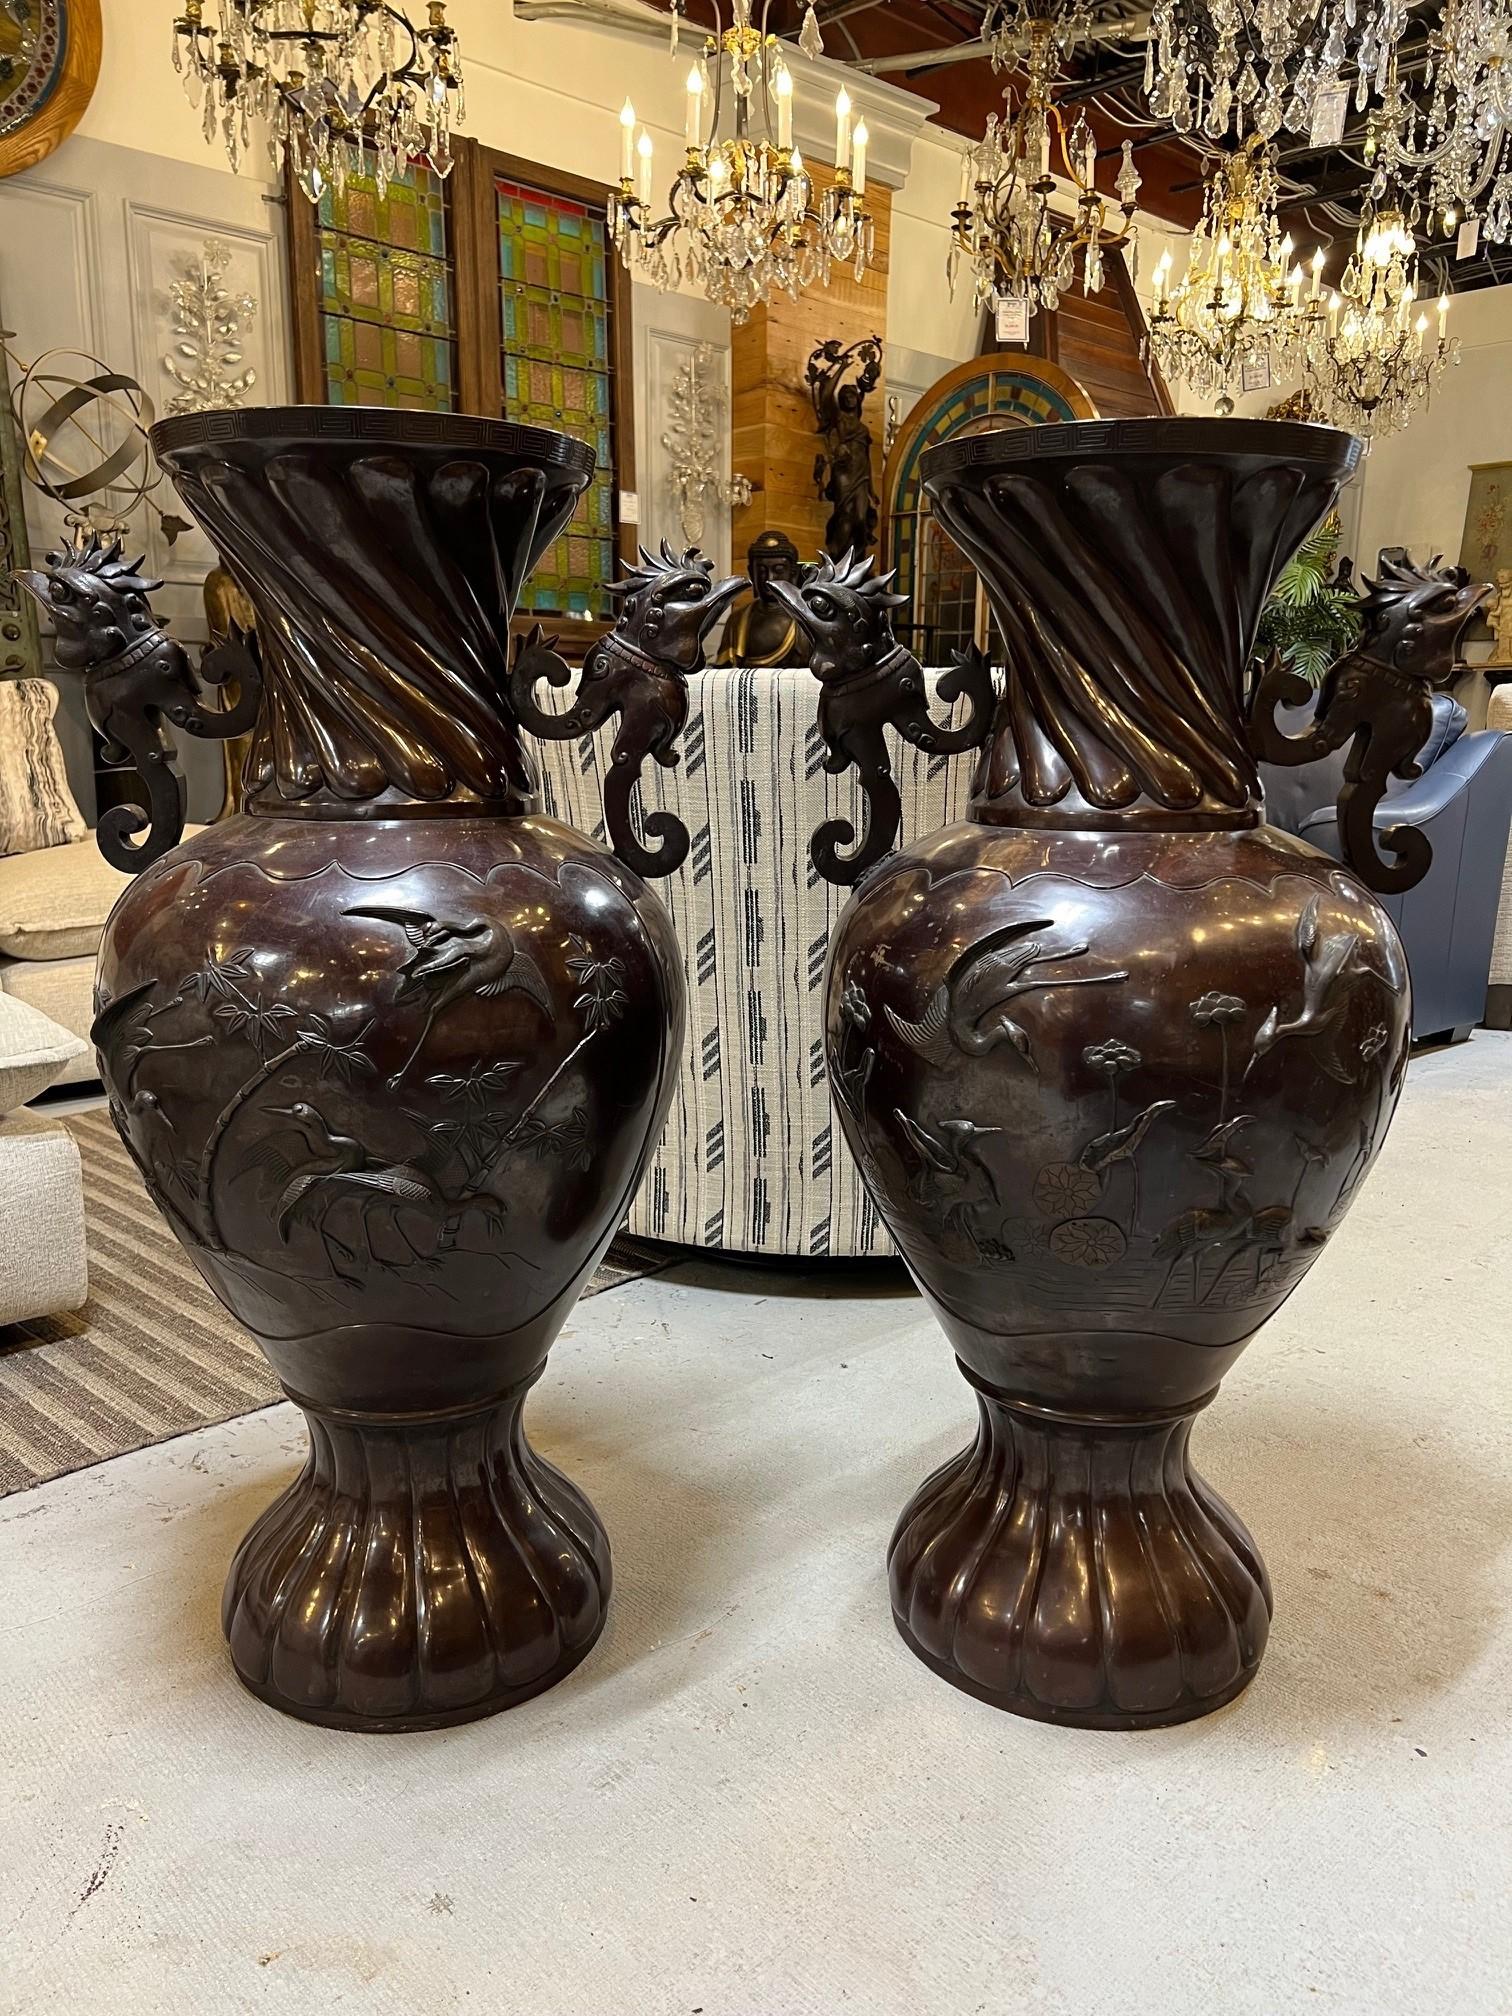 An attractive pair of Mid 20th Century Japanese large bronze urns. Bird head handles and decorative panels on both sides of raised birds, trees, and flowers makes this a beautiful pair of urns. The urns are in very good condition and could be used